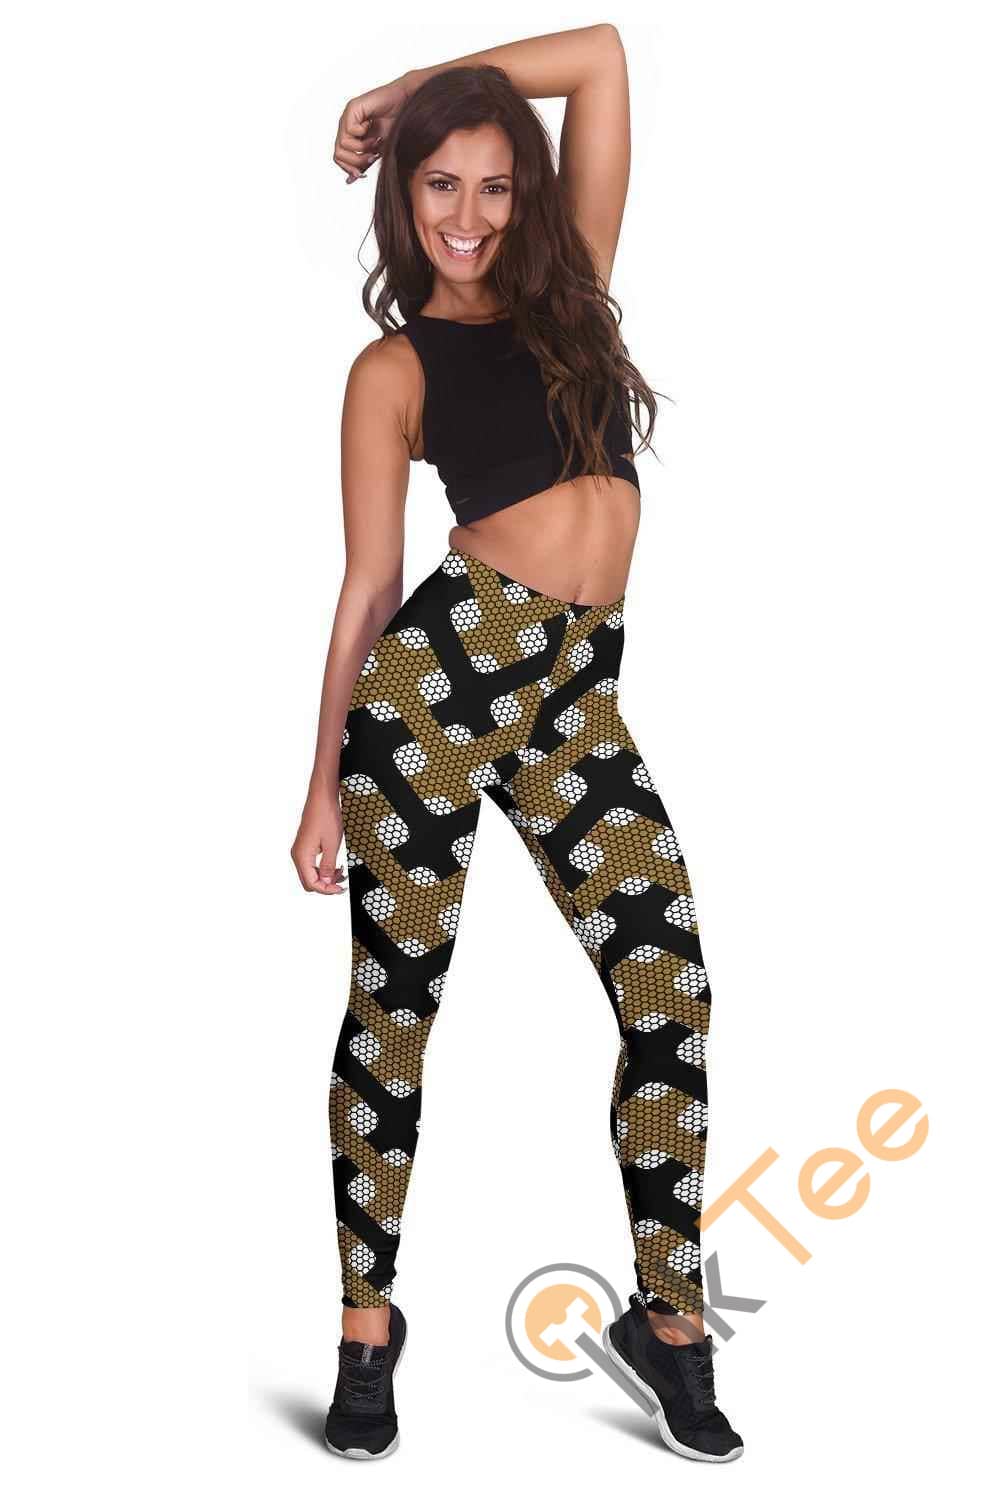 Inktee Store - Wake Forest Deamon Deacons Inspired Liberty 3D All Over Print For Yoga Fitness Fashion Women'S Leggings Image